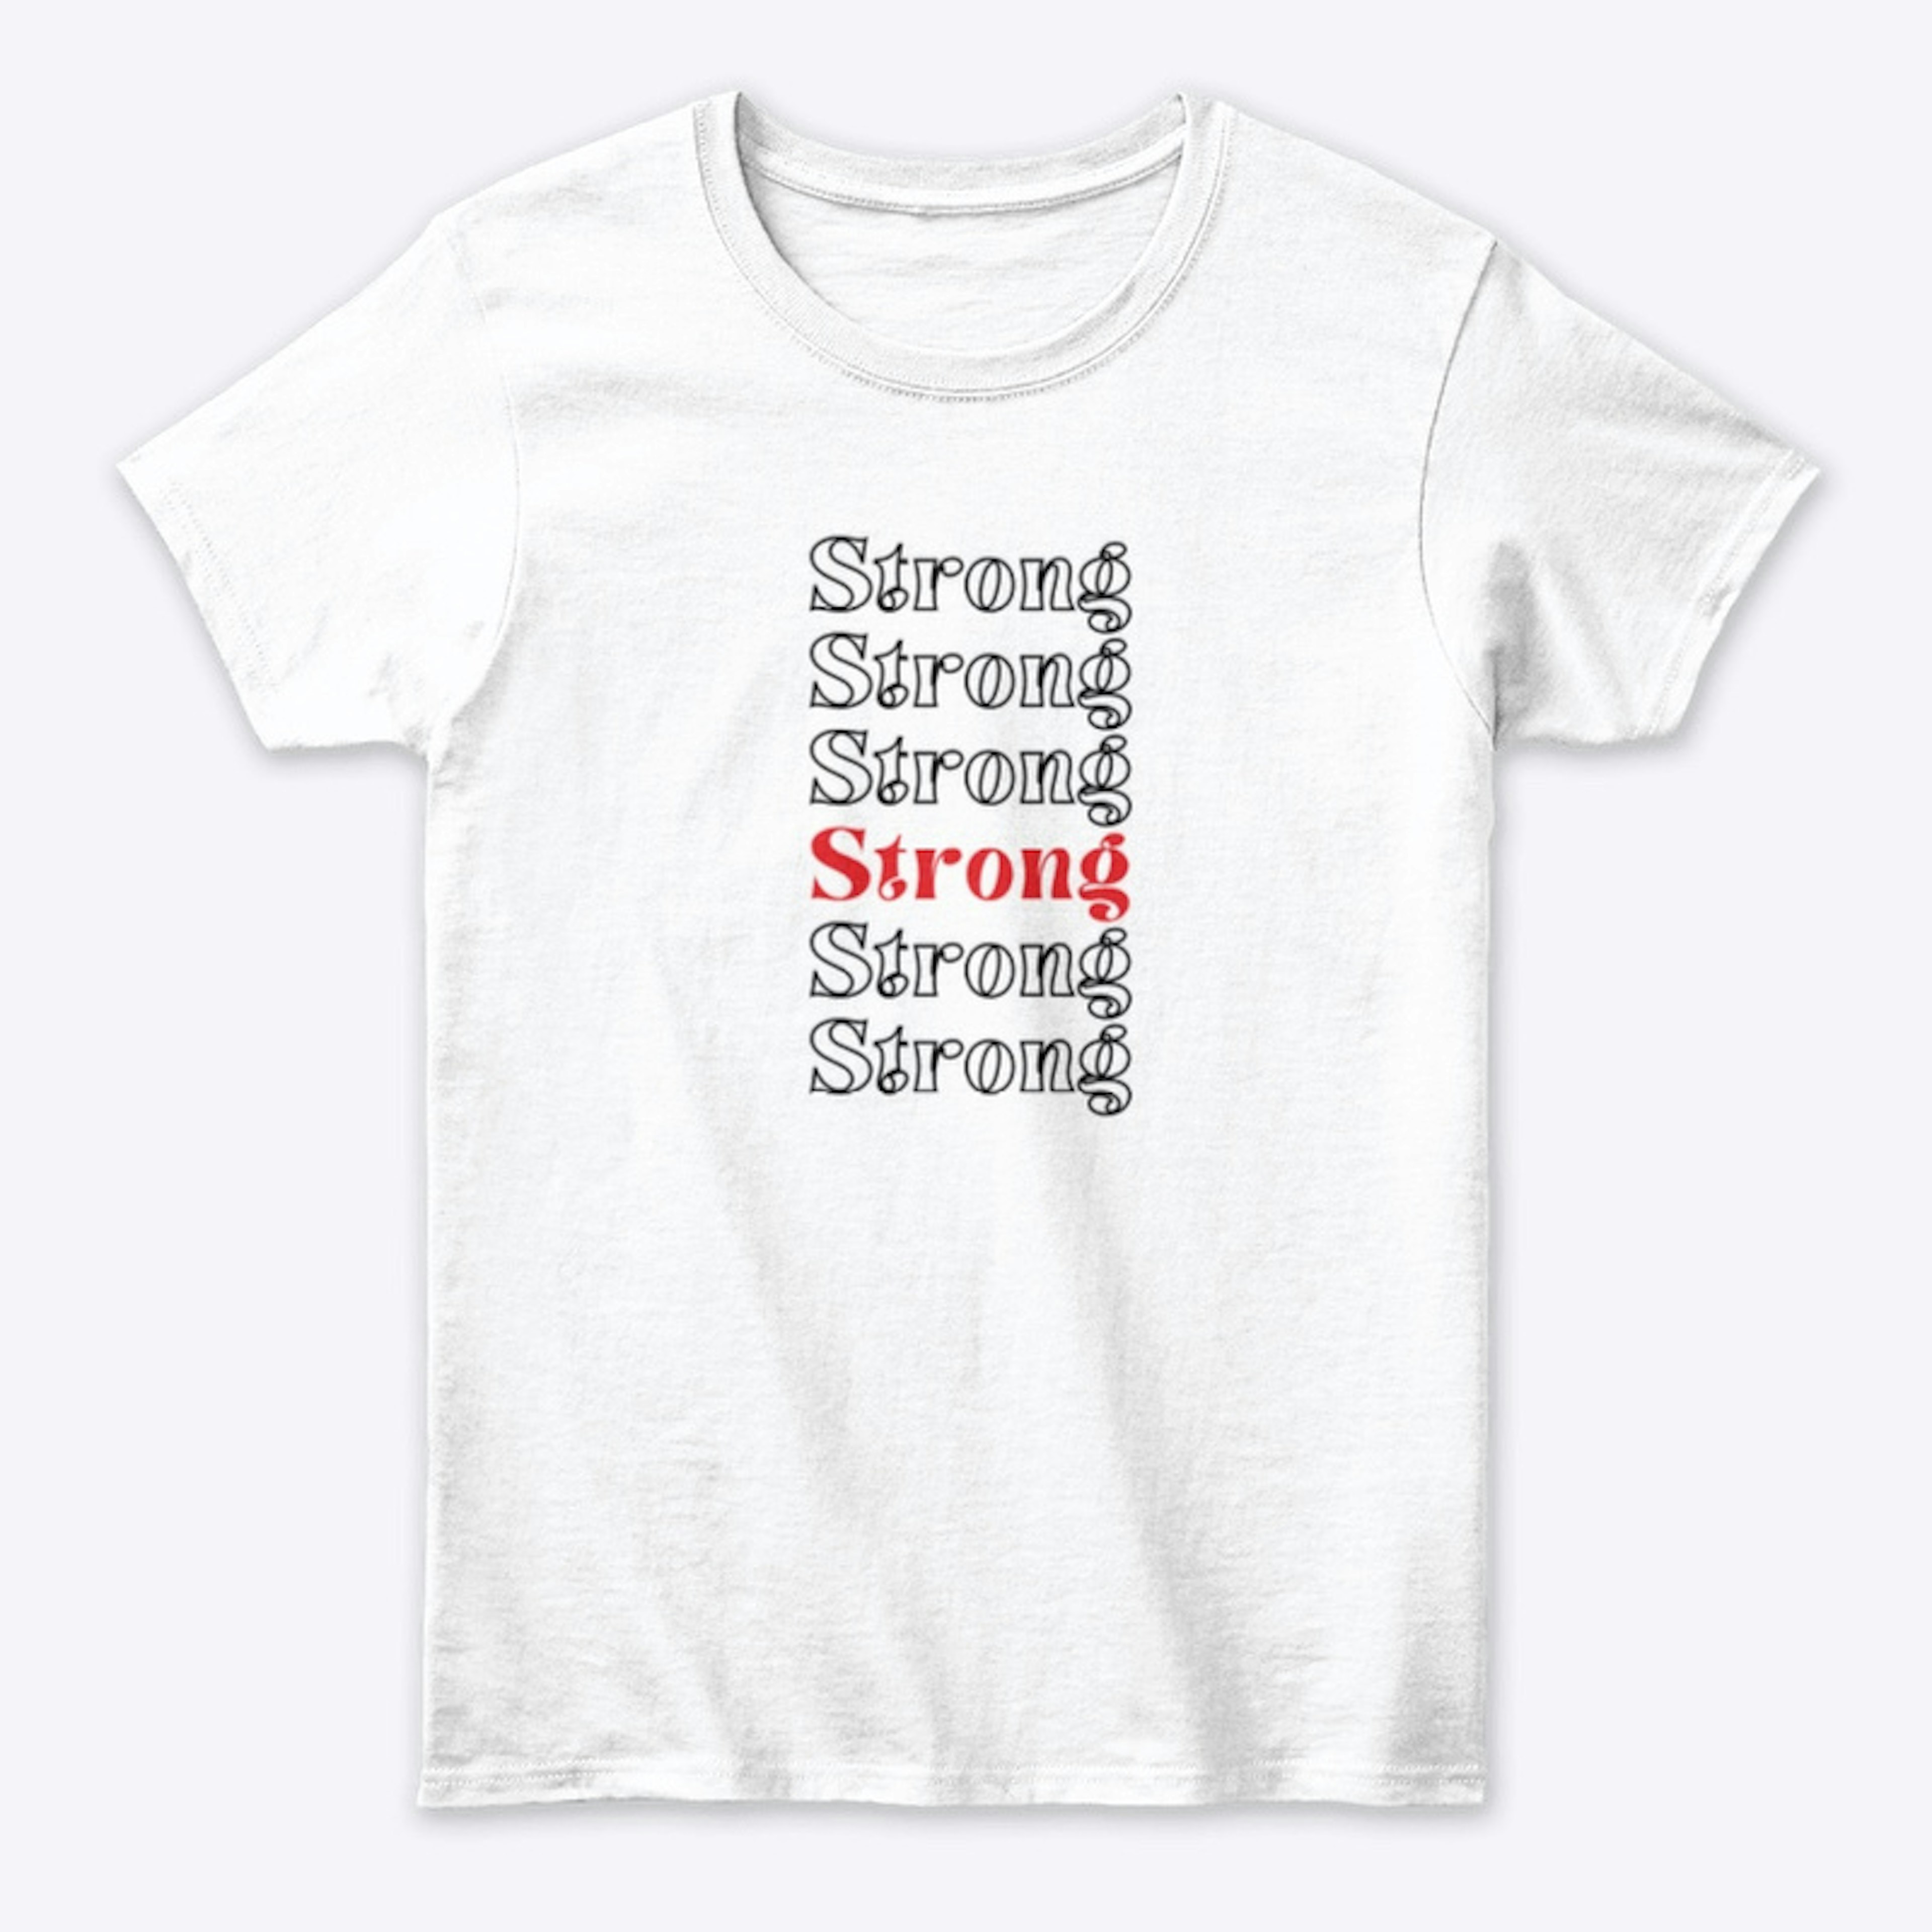 You are Strong Double Take T-shirt 